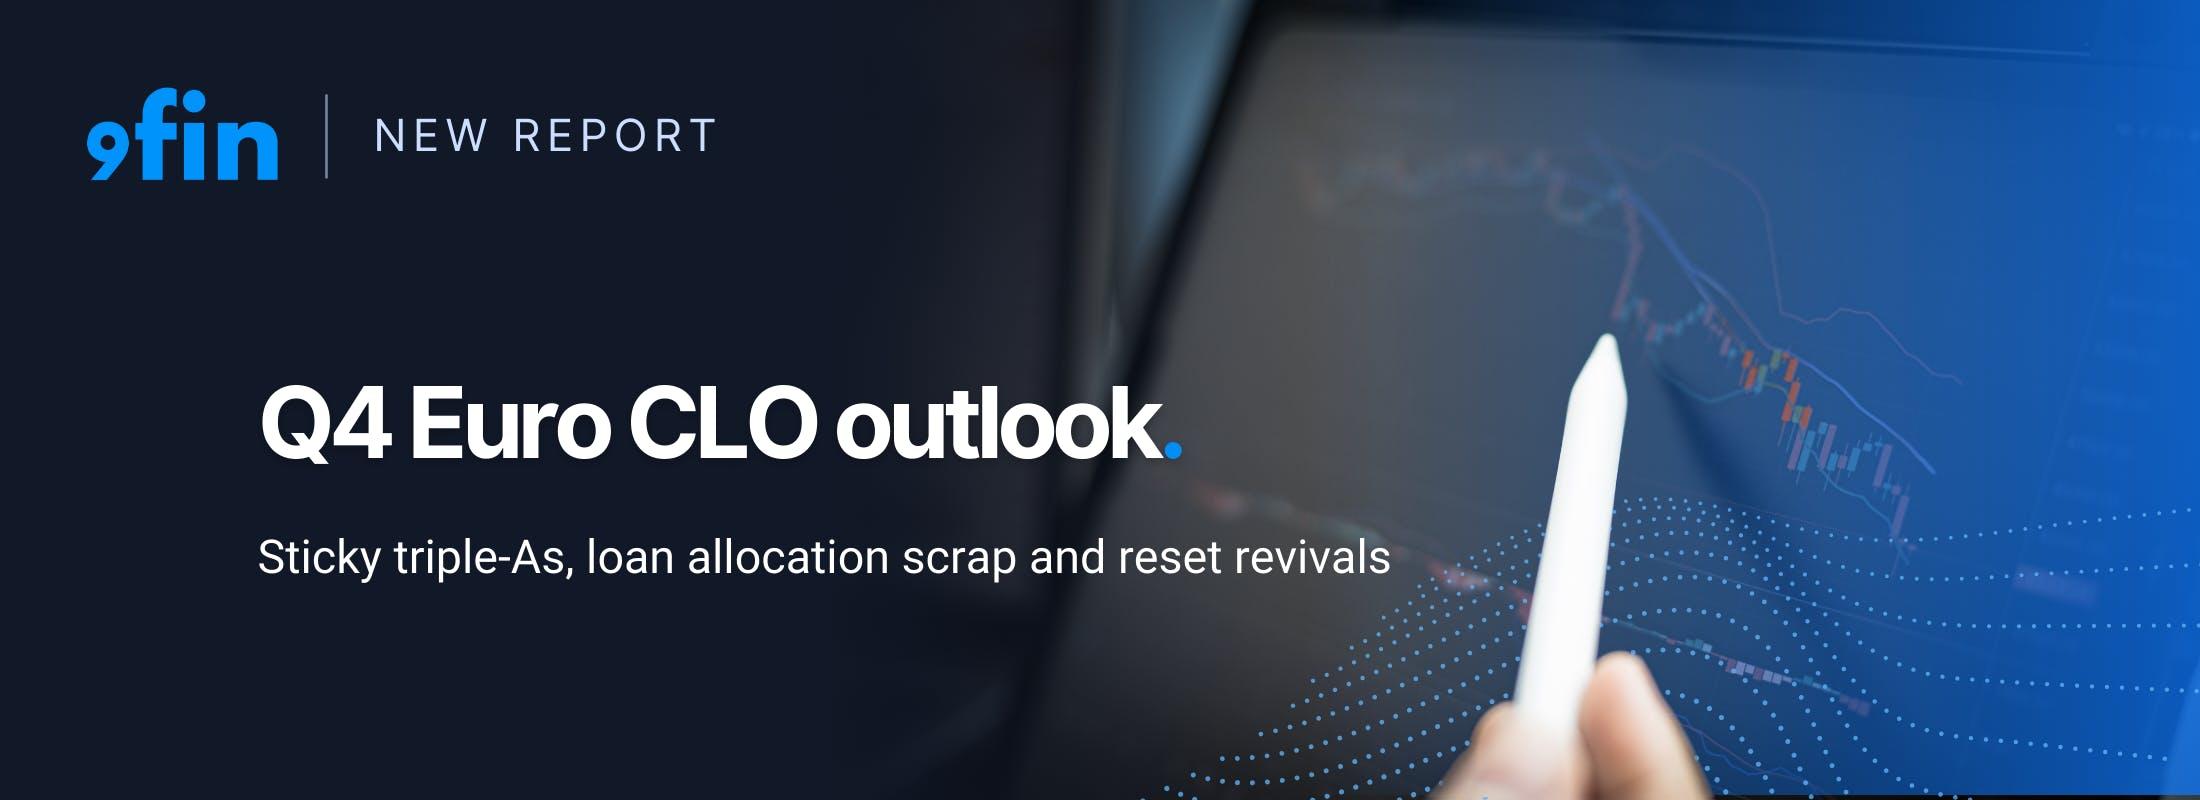 Q4 Euro CLO outlook — Sticky triple-As, loan allocation scrap and reset revivals